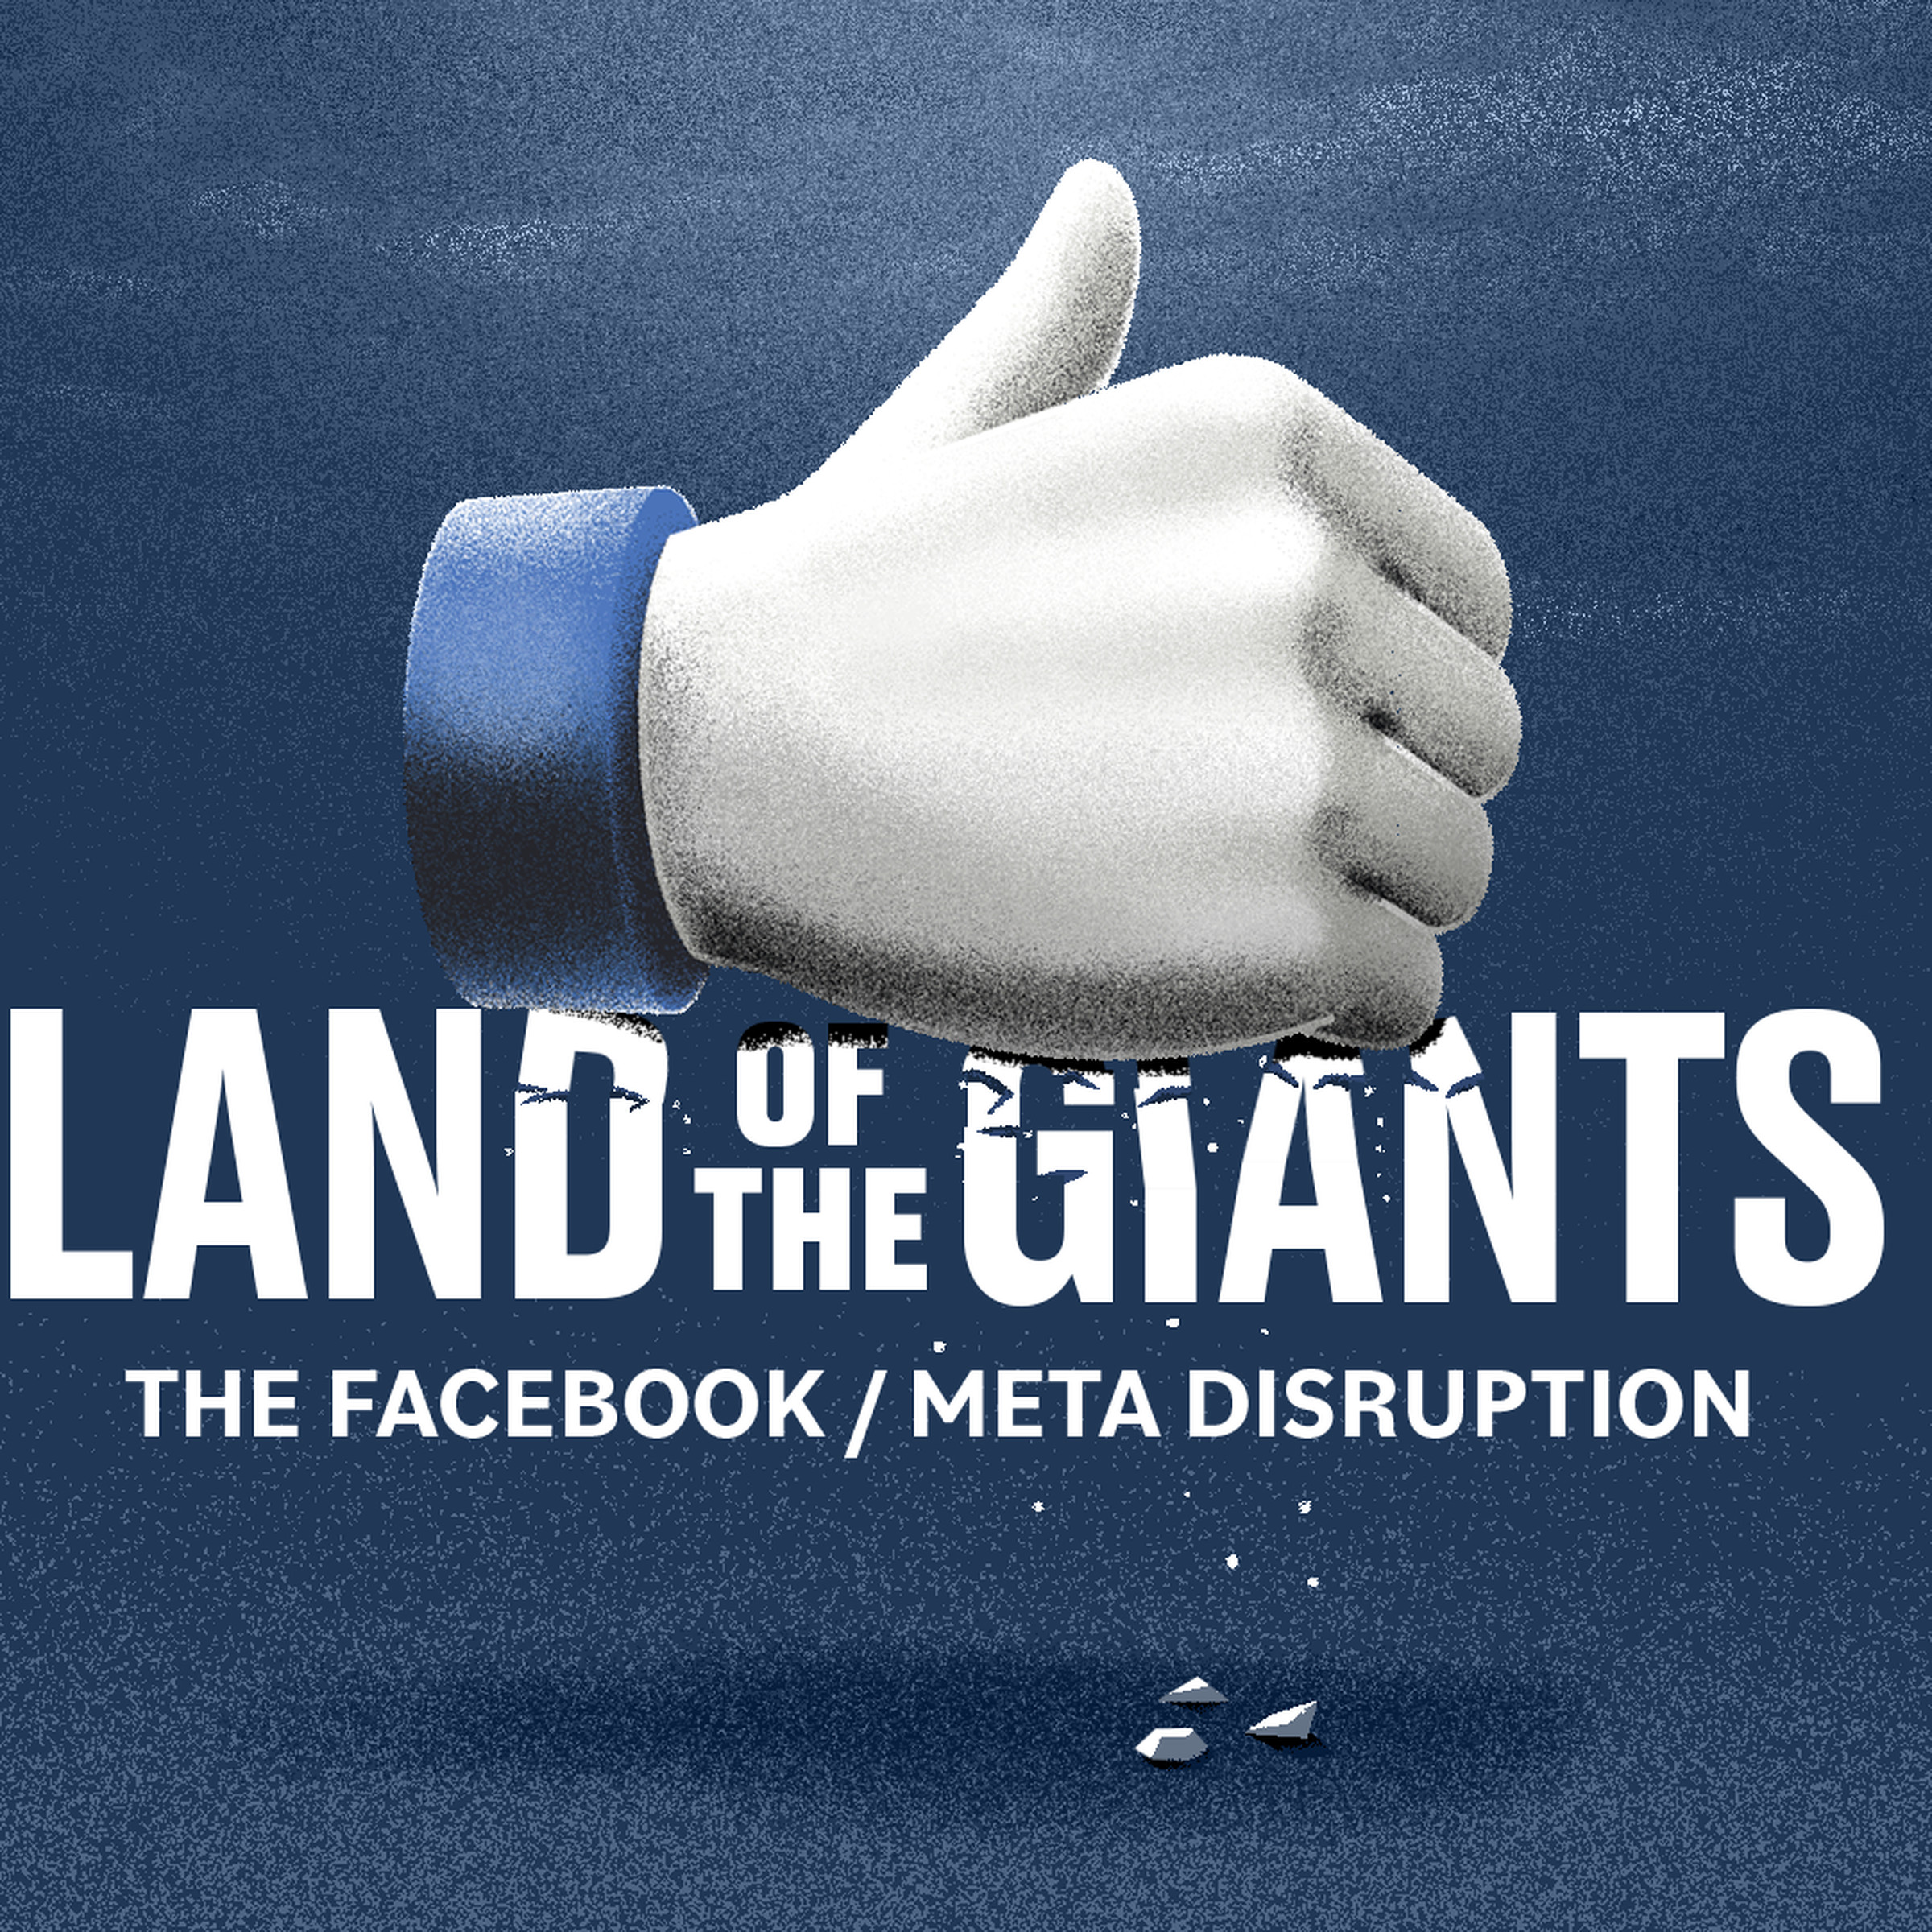 Land of the Giants: The Facebook/Meta Disruption podcast artwork showing the series title and a hand giving a thumbs up in Facebook-like colors.